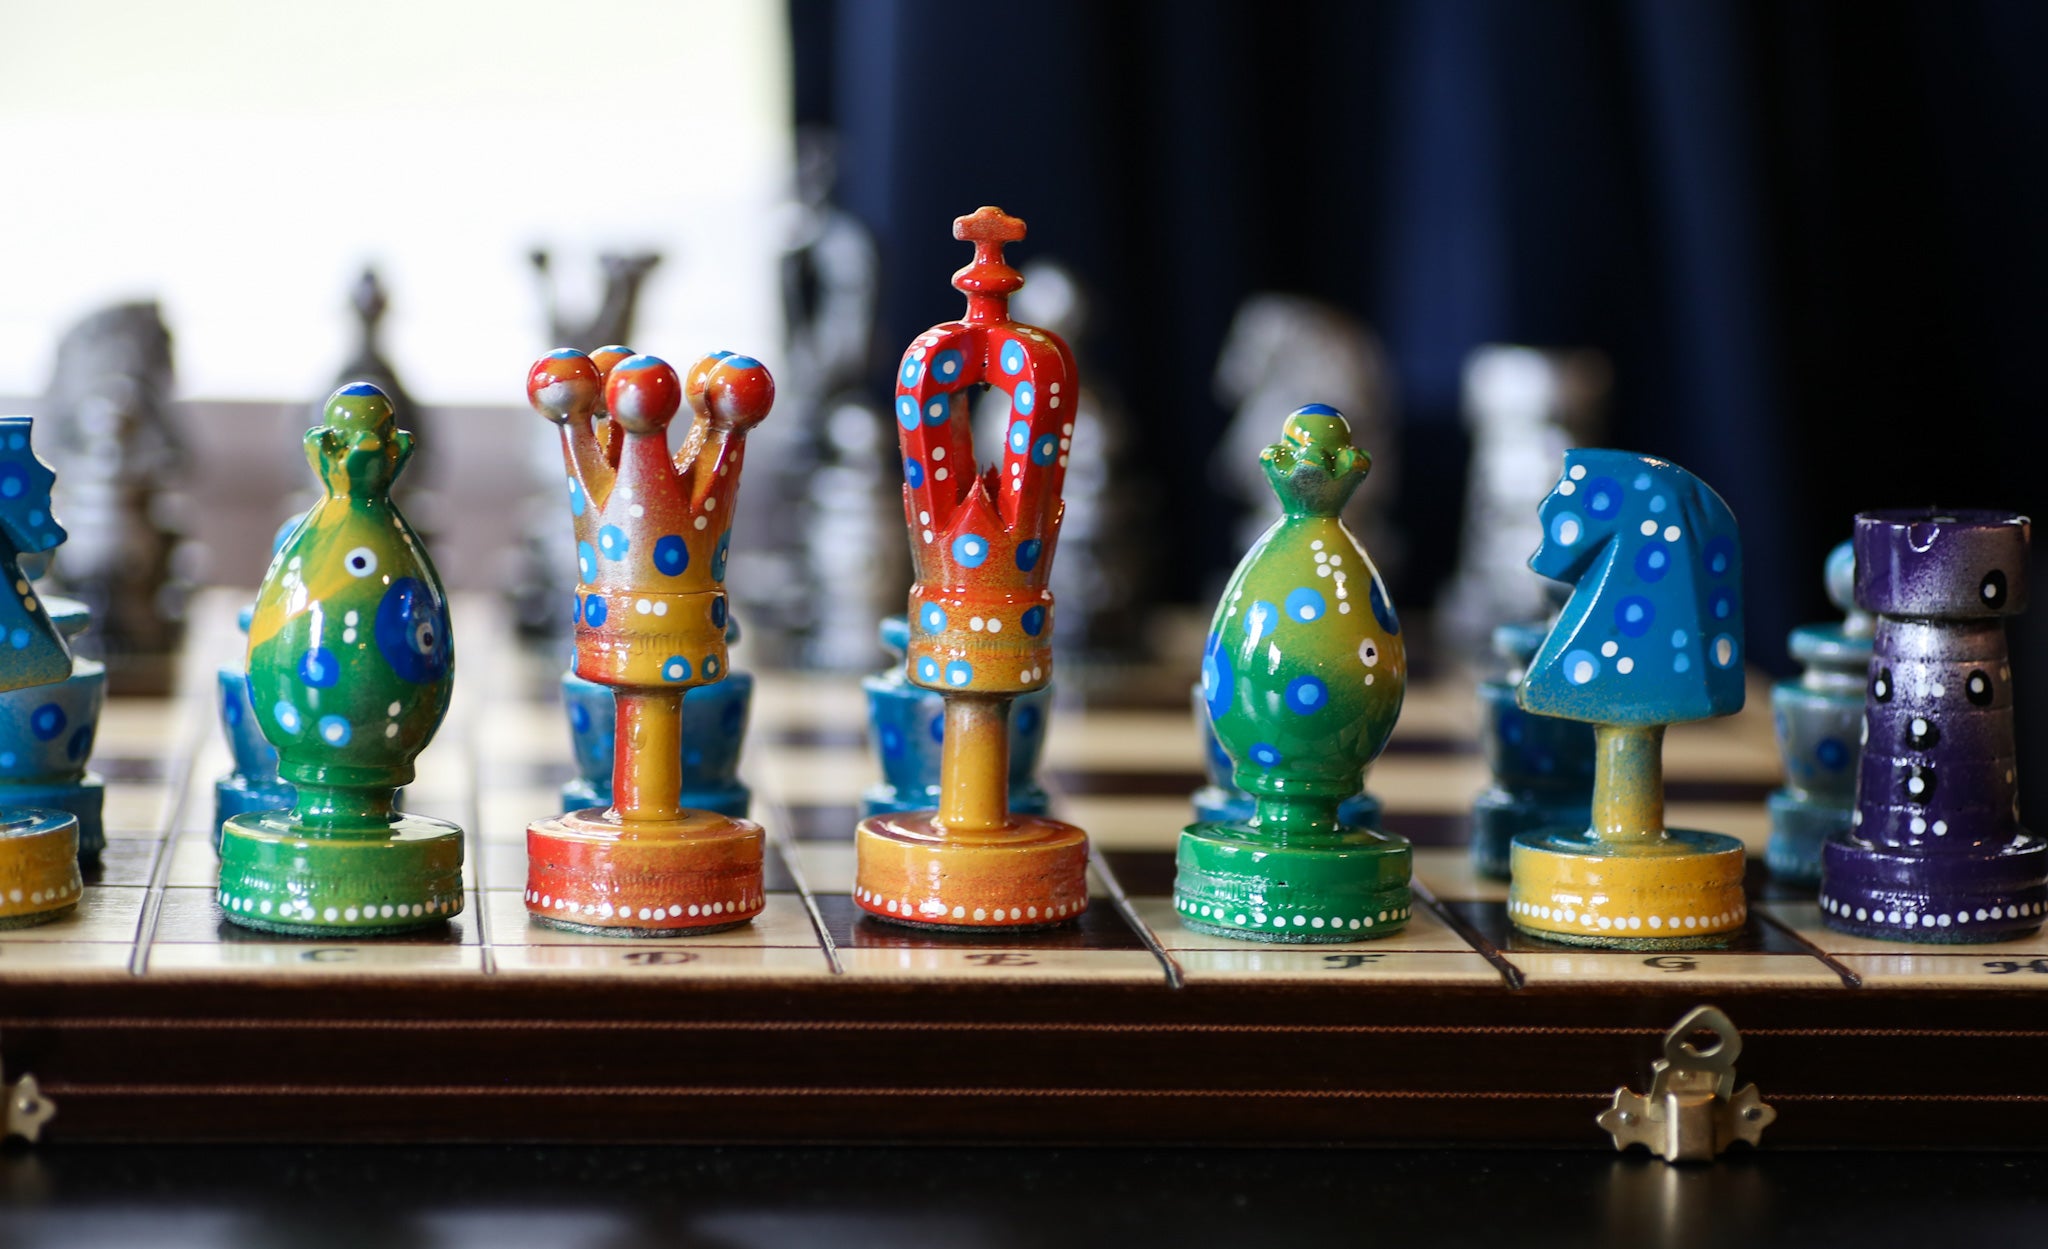 The Decorated Strategist - Sydney Gruber Painted 20" Large King's Inlaid Chess Set #8 - Chess Set - Chess-House